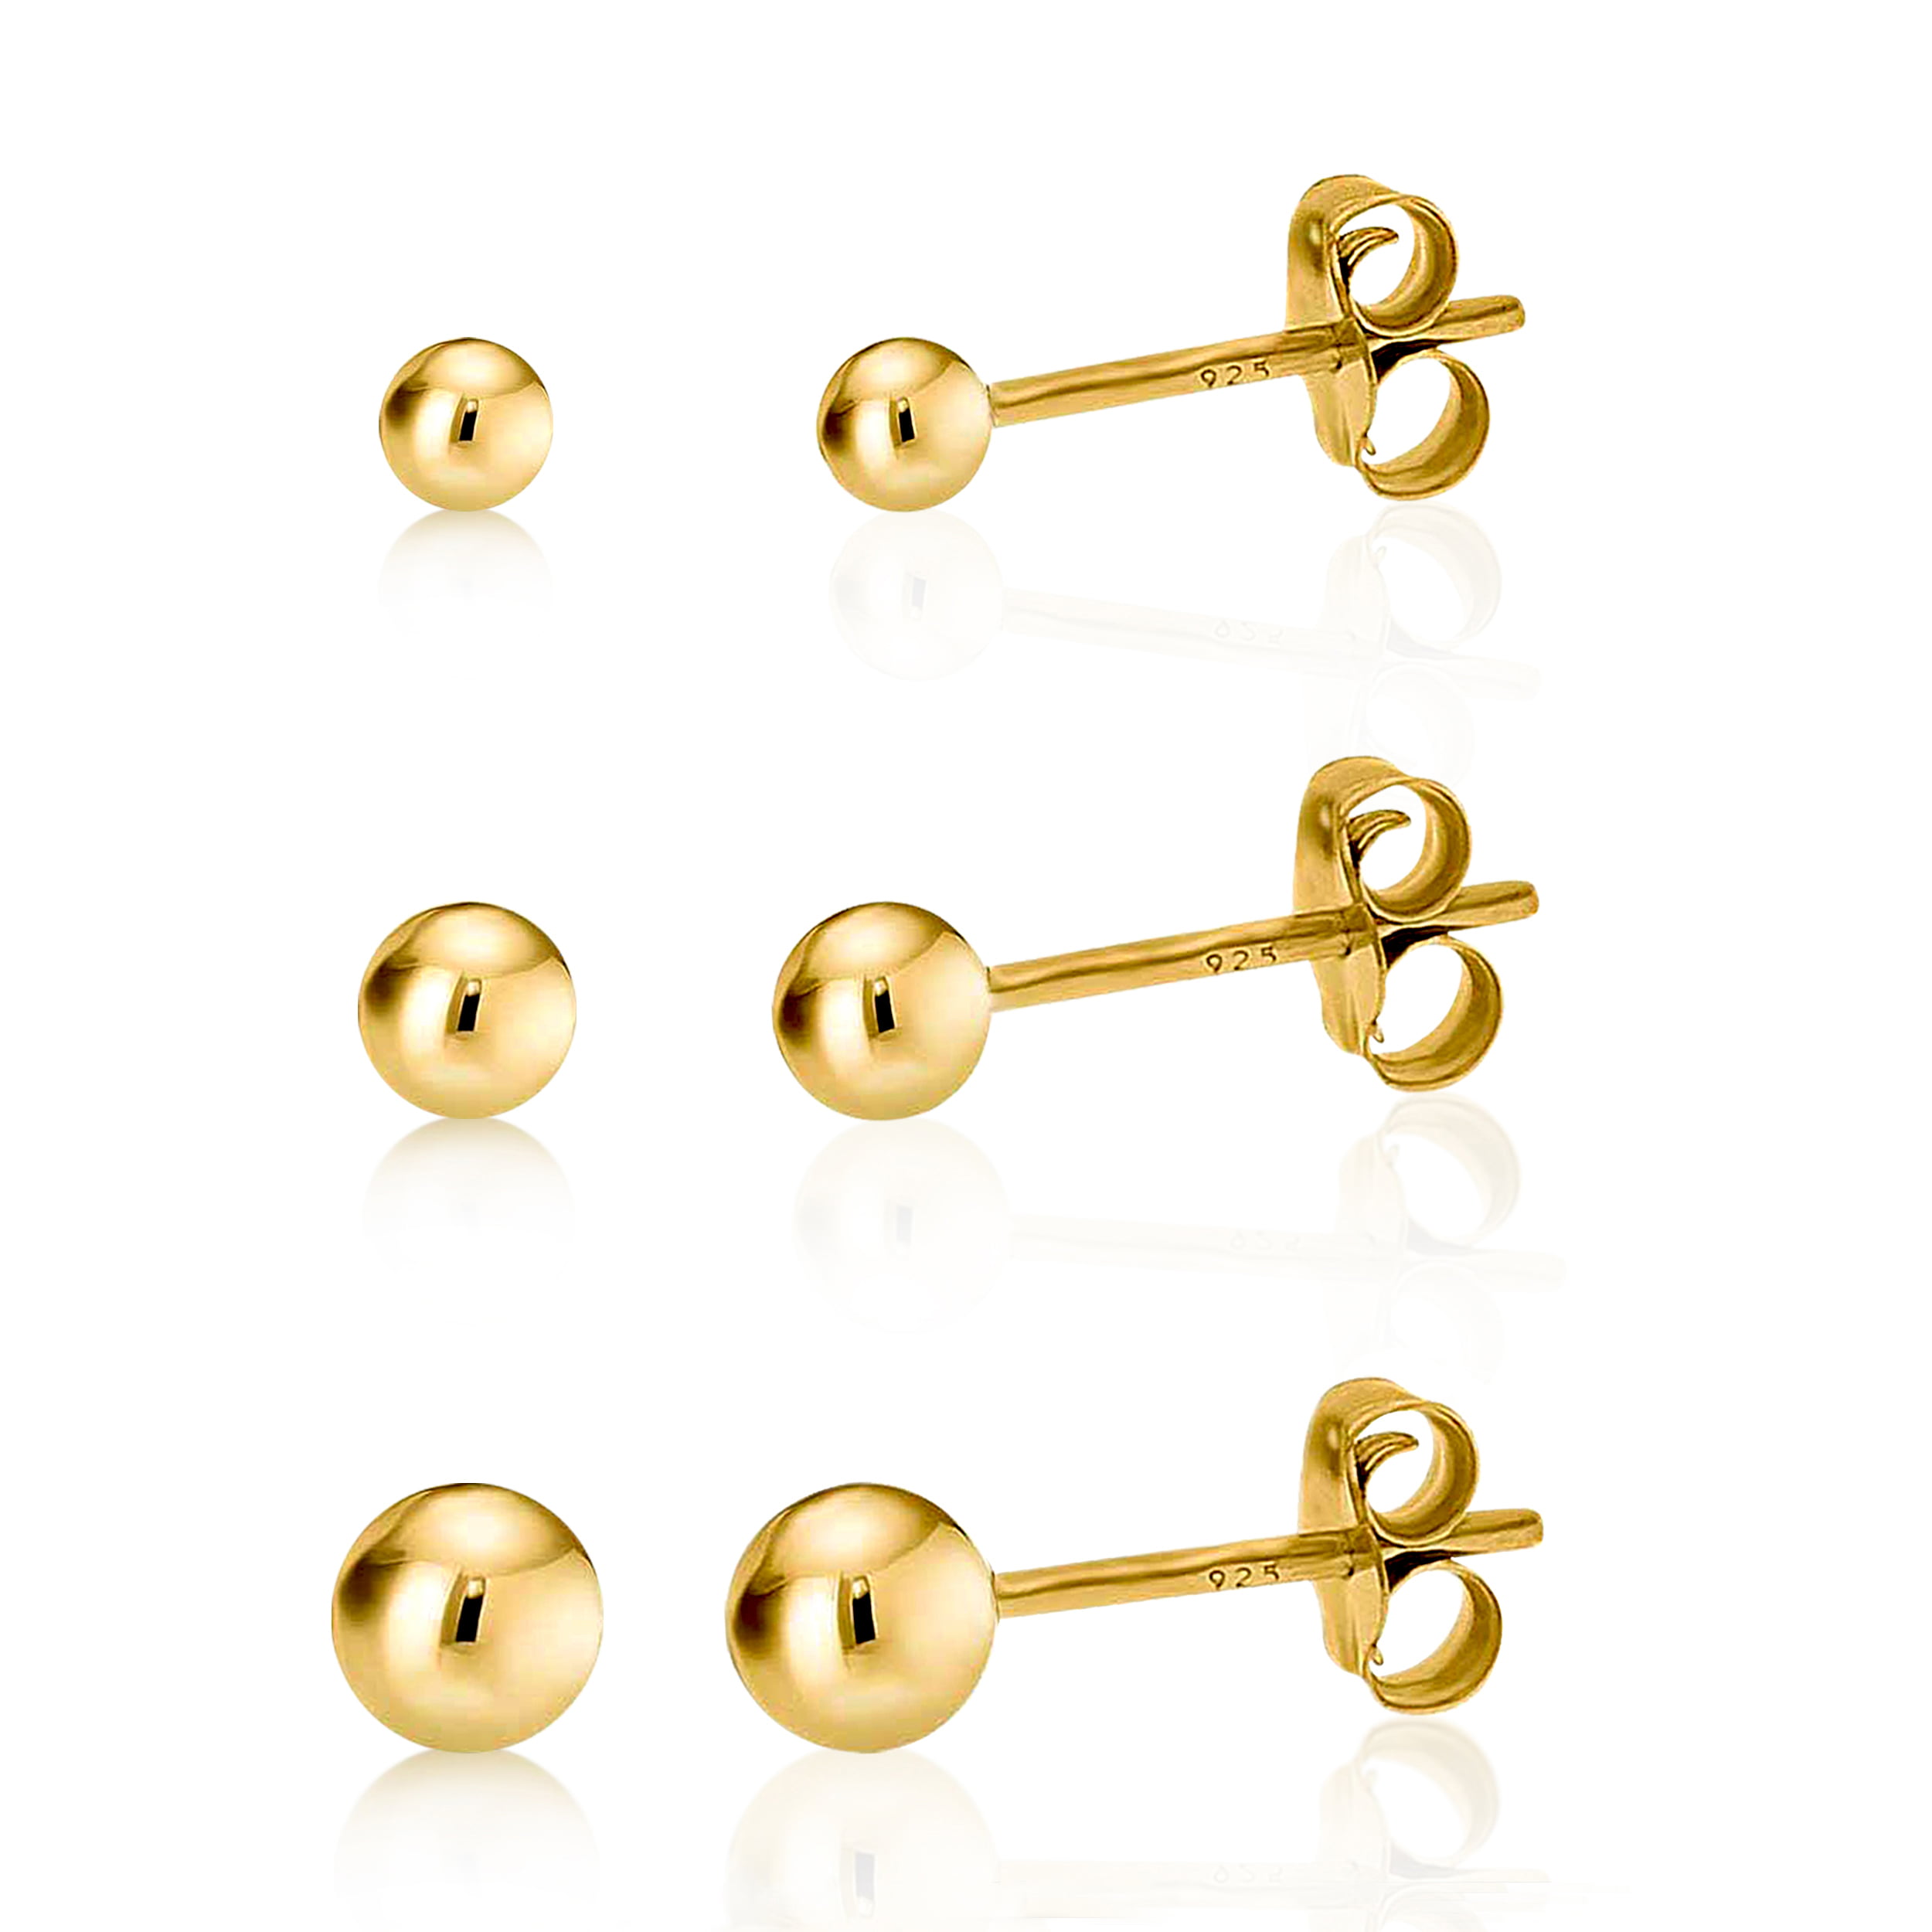 EXCELLENT QUALITY SOLID 9CT YELLOW GOLD 4mm BALL STUD EARRINGS BRAND NEW 